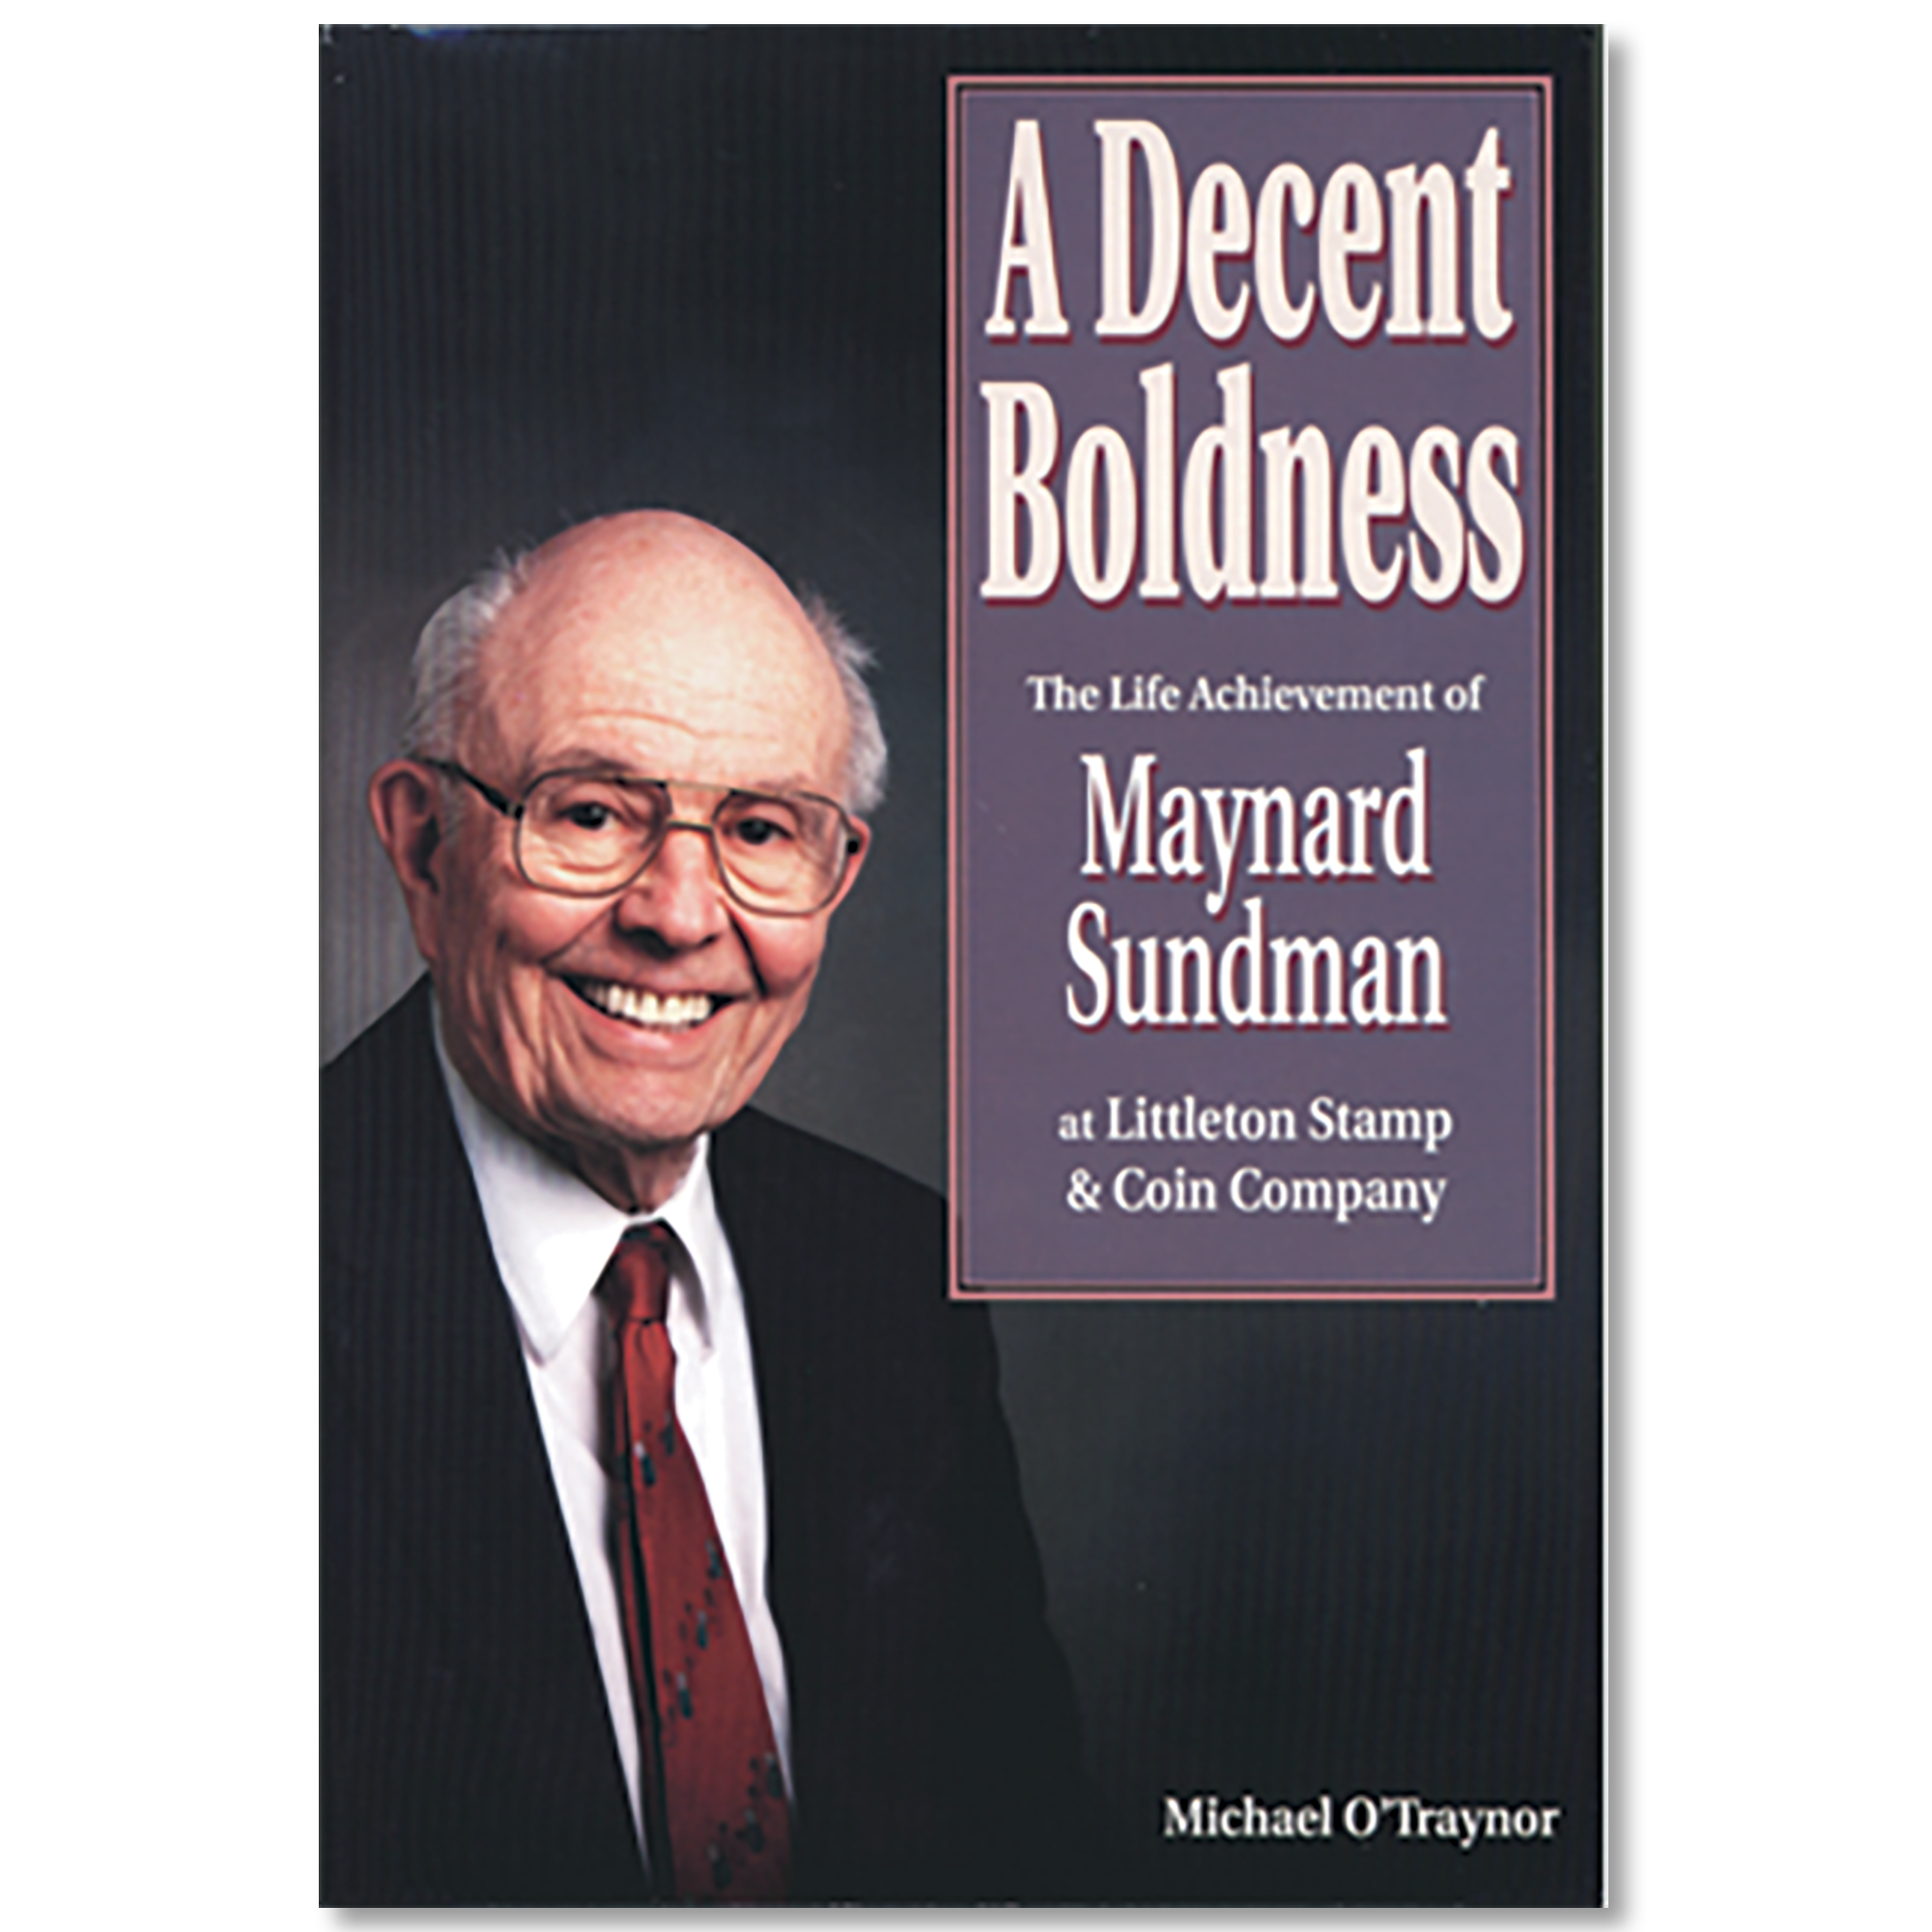 [photo: A Decent Boldness, by Michael O'Traynor, hardcover]